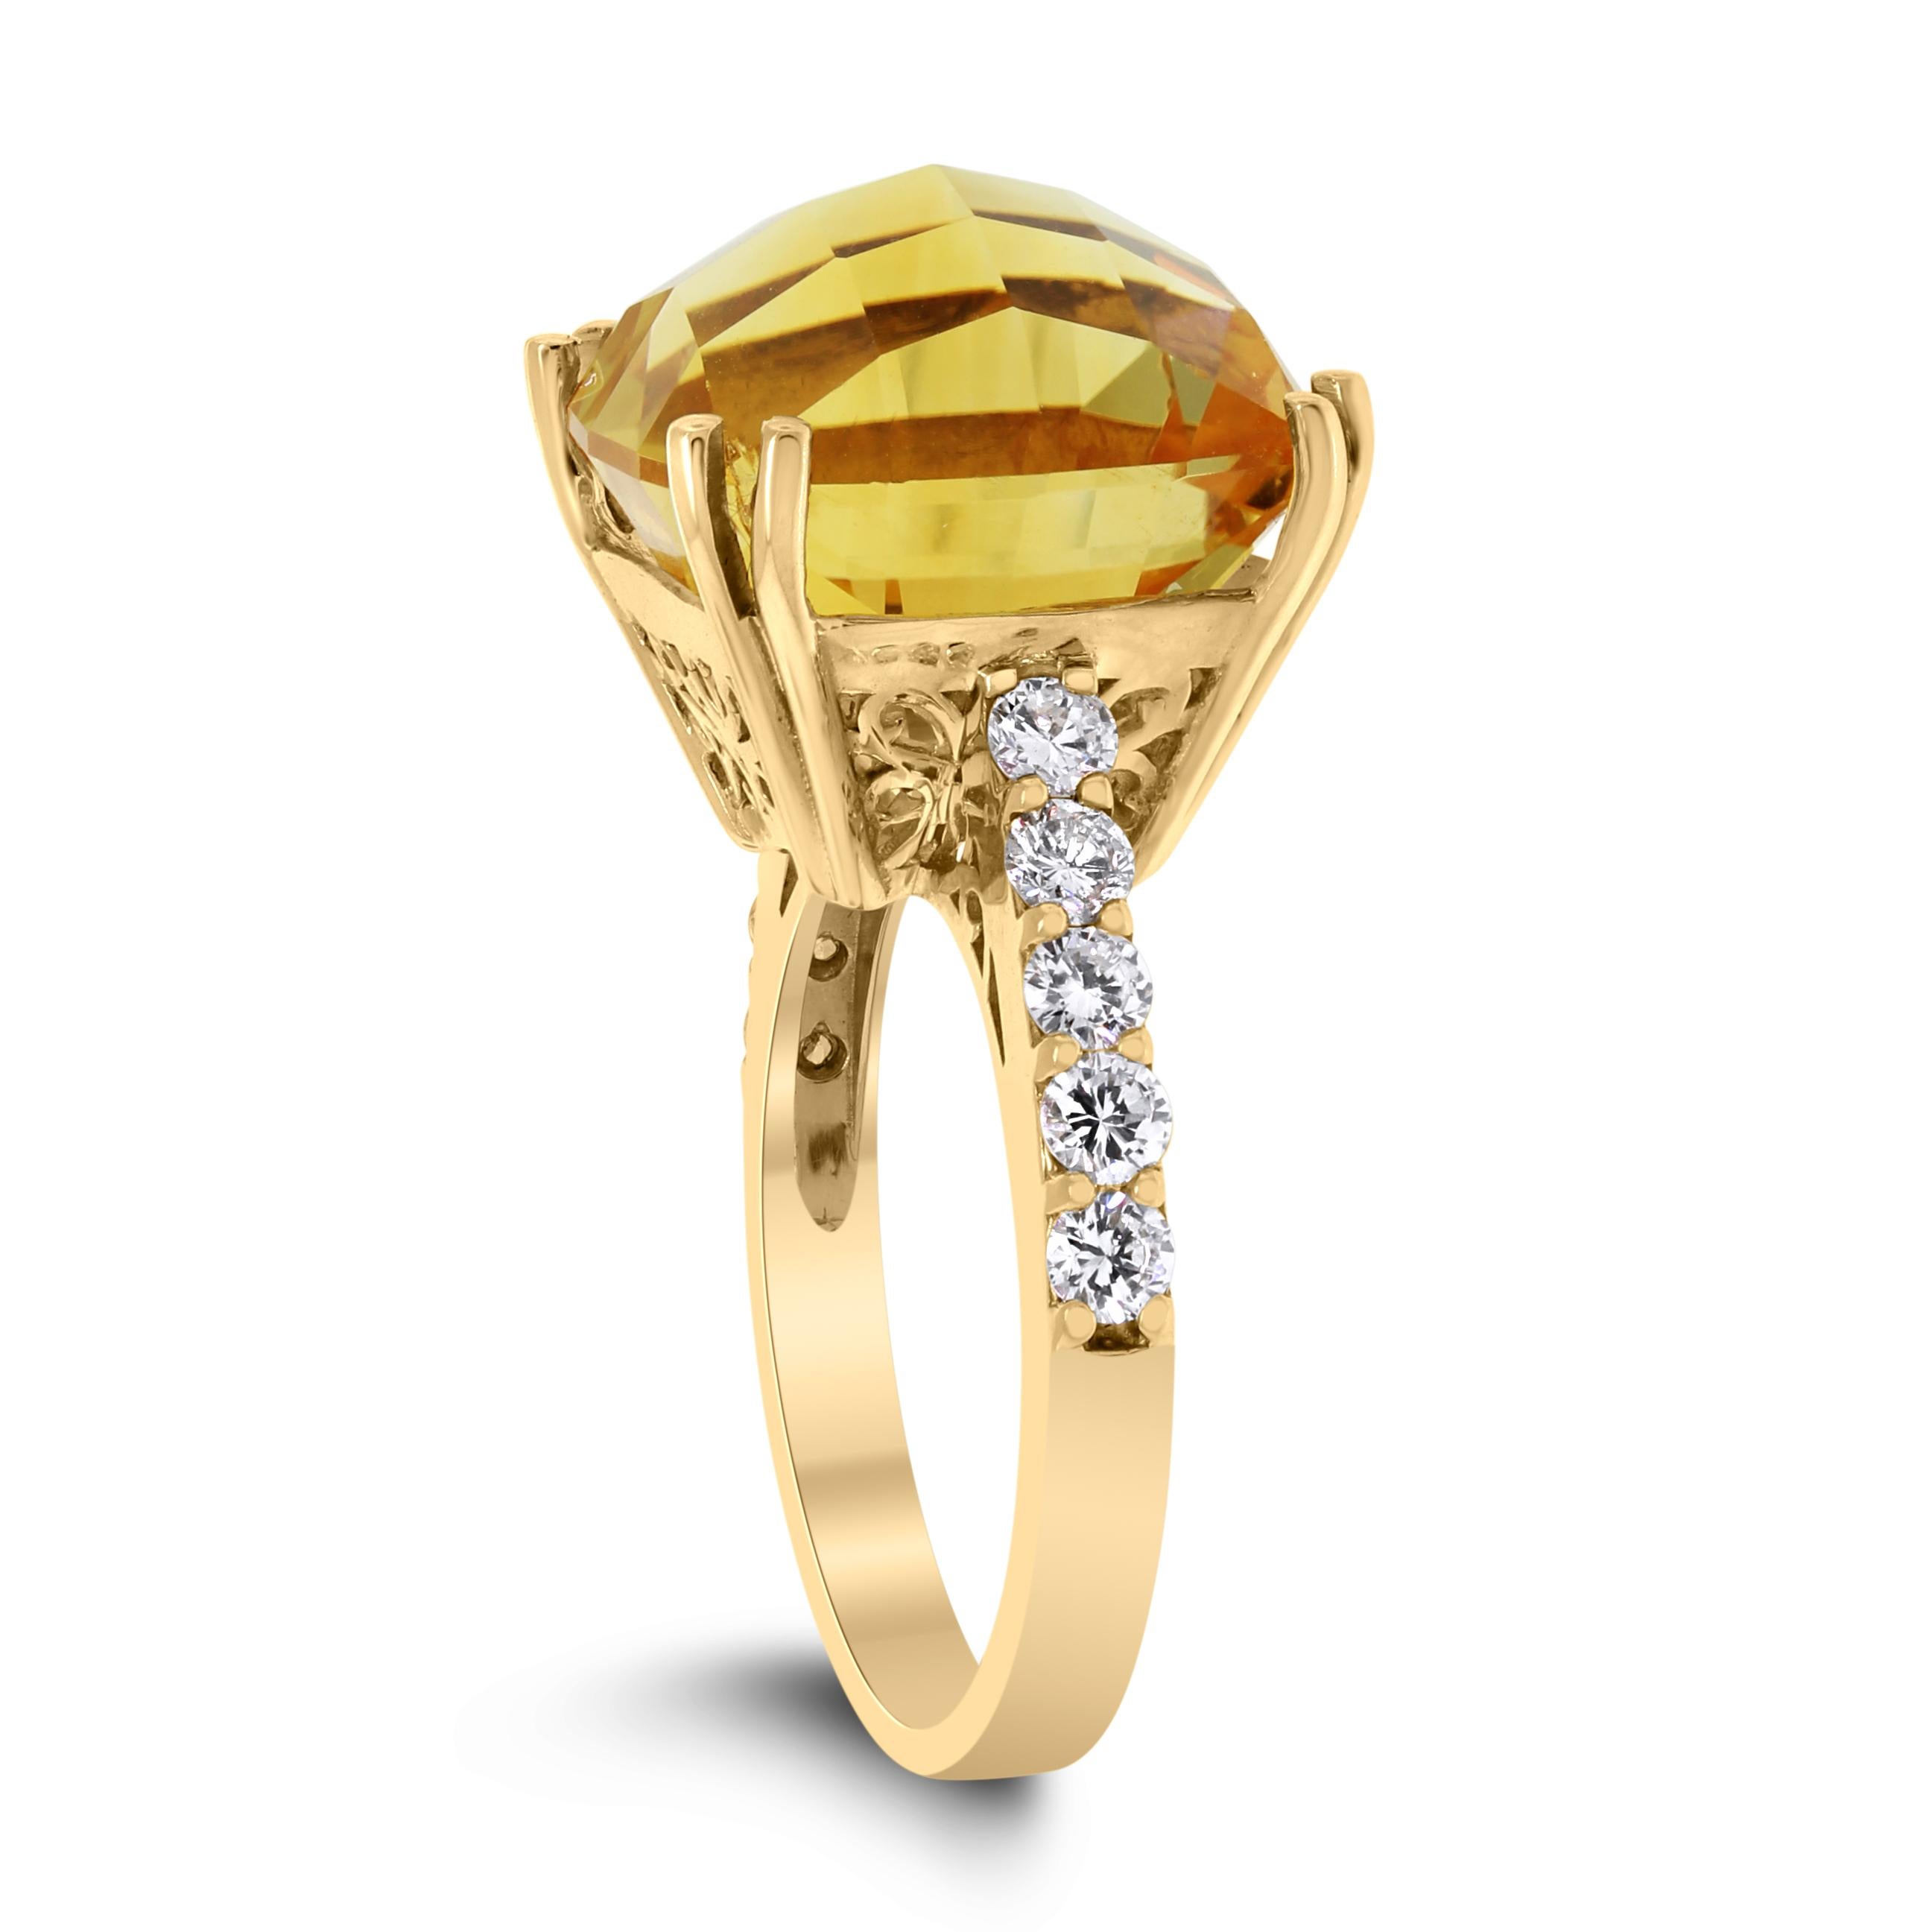 A fiery Citrine set in a Yellow Gold & Diamond setting, this ring is a lush with golden yellow flames. 

Gemstones Type: Citrine 
Gemstones Shape: Square 
Gemstones Weight: 12.86 ct 
Gemstones Color: Orangey Yellow 

Diamonds Shape: Round 
Side